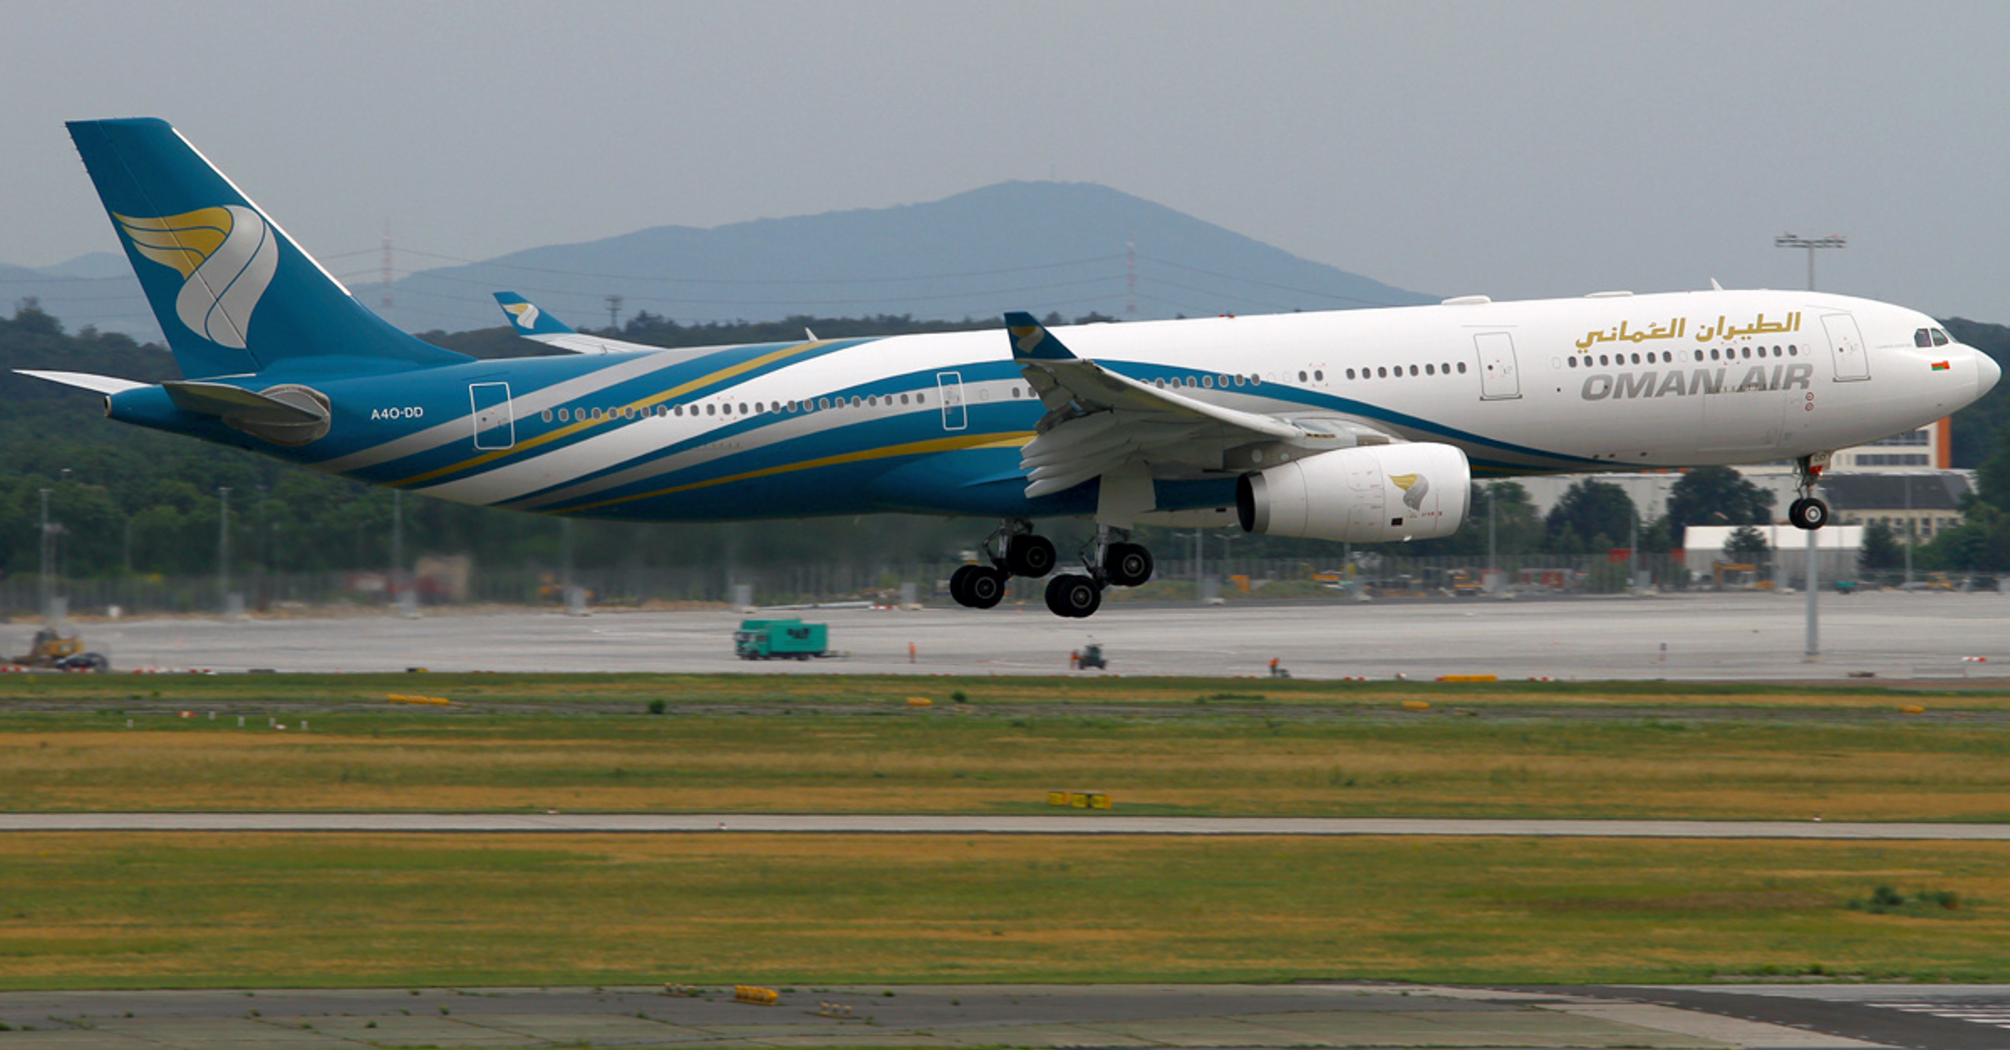 Oman Air has announced significant changes to its routes in Asia